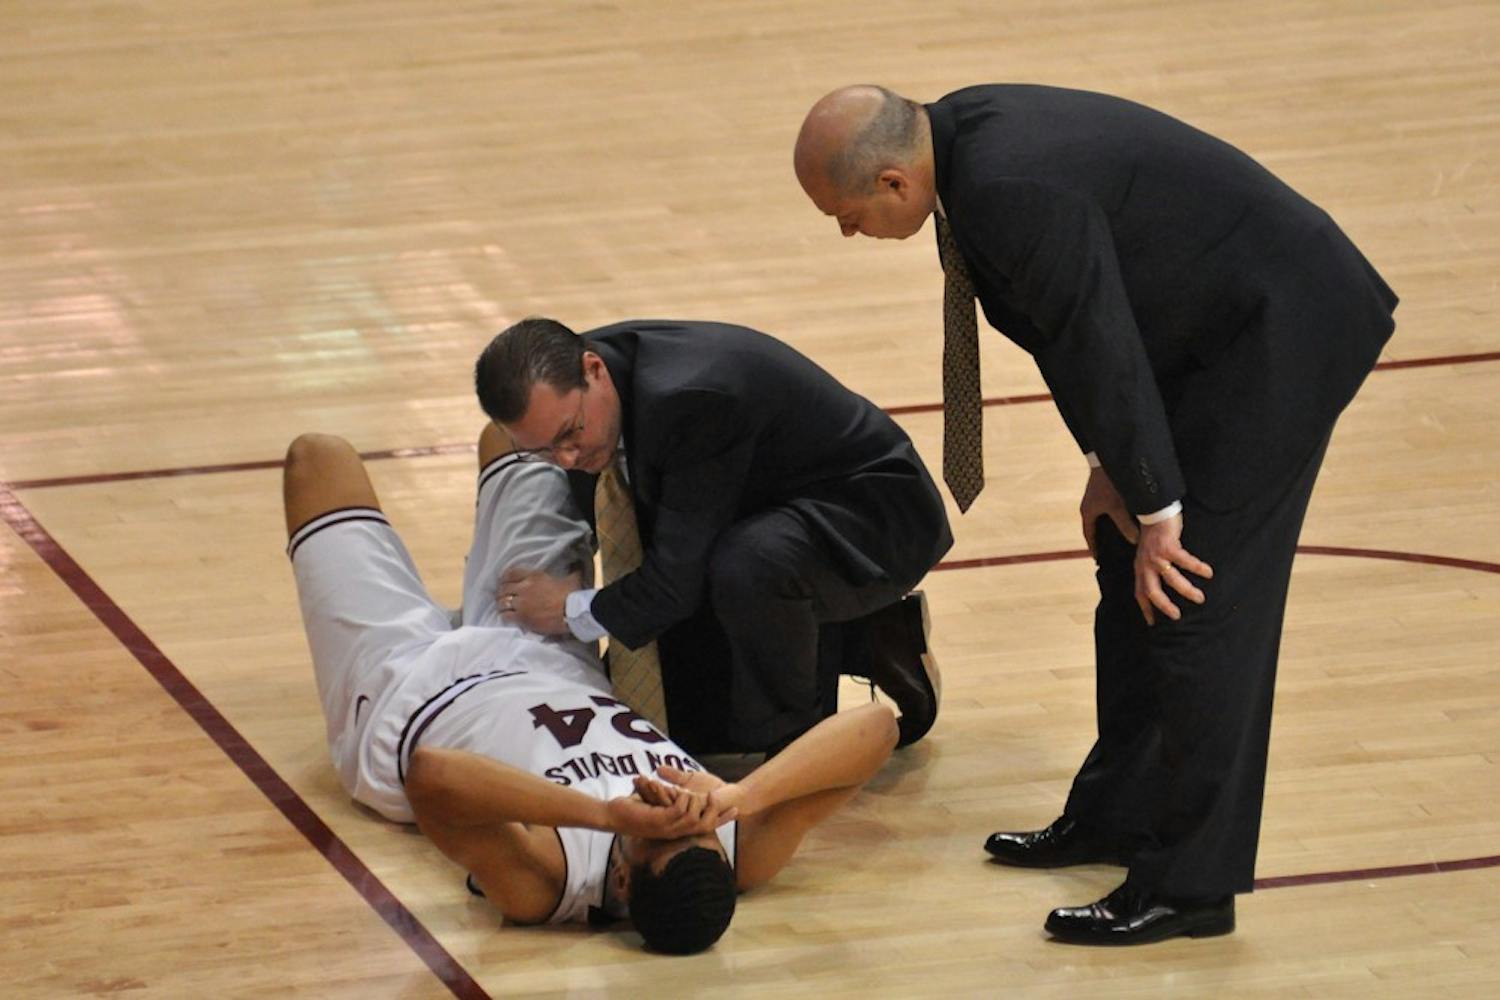 Trent Lockett's ankle is examined on the court by a trainer and coach Herb Sendek after he injured it with 10 minutes remaining in the game. Sendek told reporters during the postgame press conference that Lockett's x-ray results came back negative and that Lockett had badly sprained his ankle.  (Photo by Aaron Lavinsky)